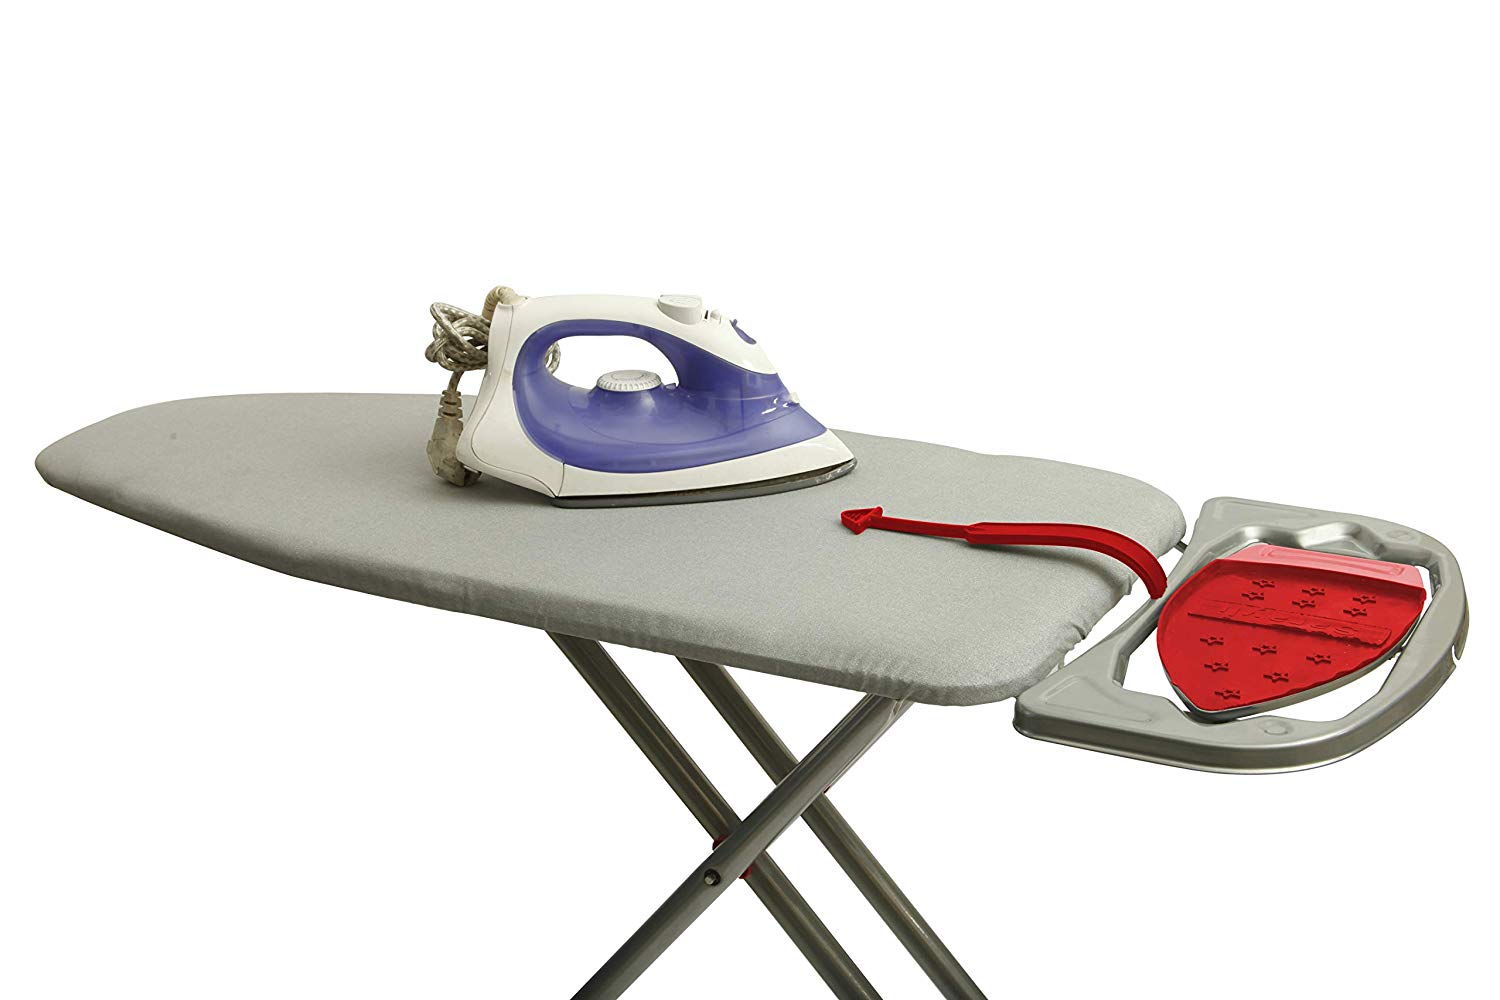 How To Fold Ironing Board